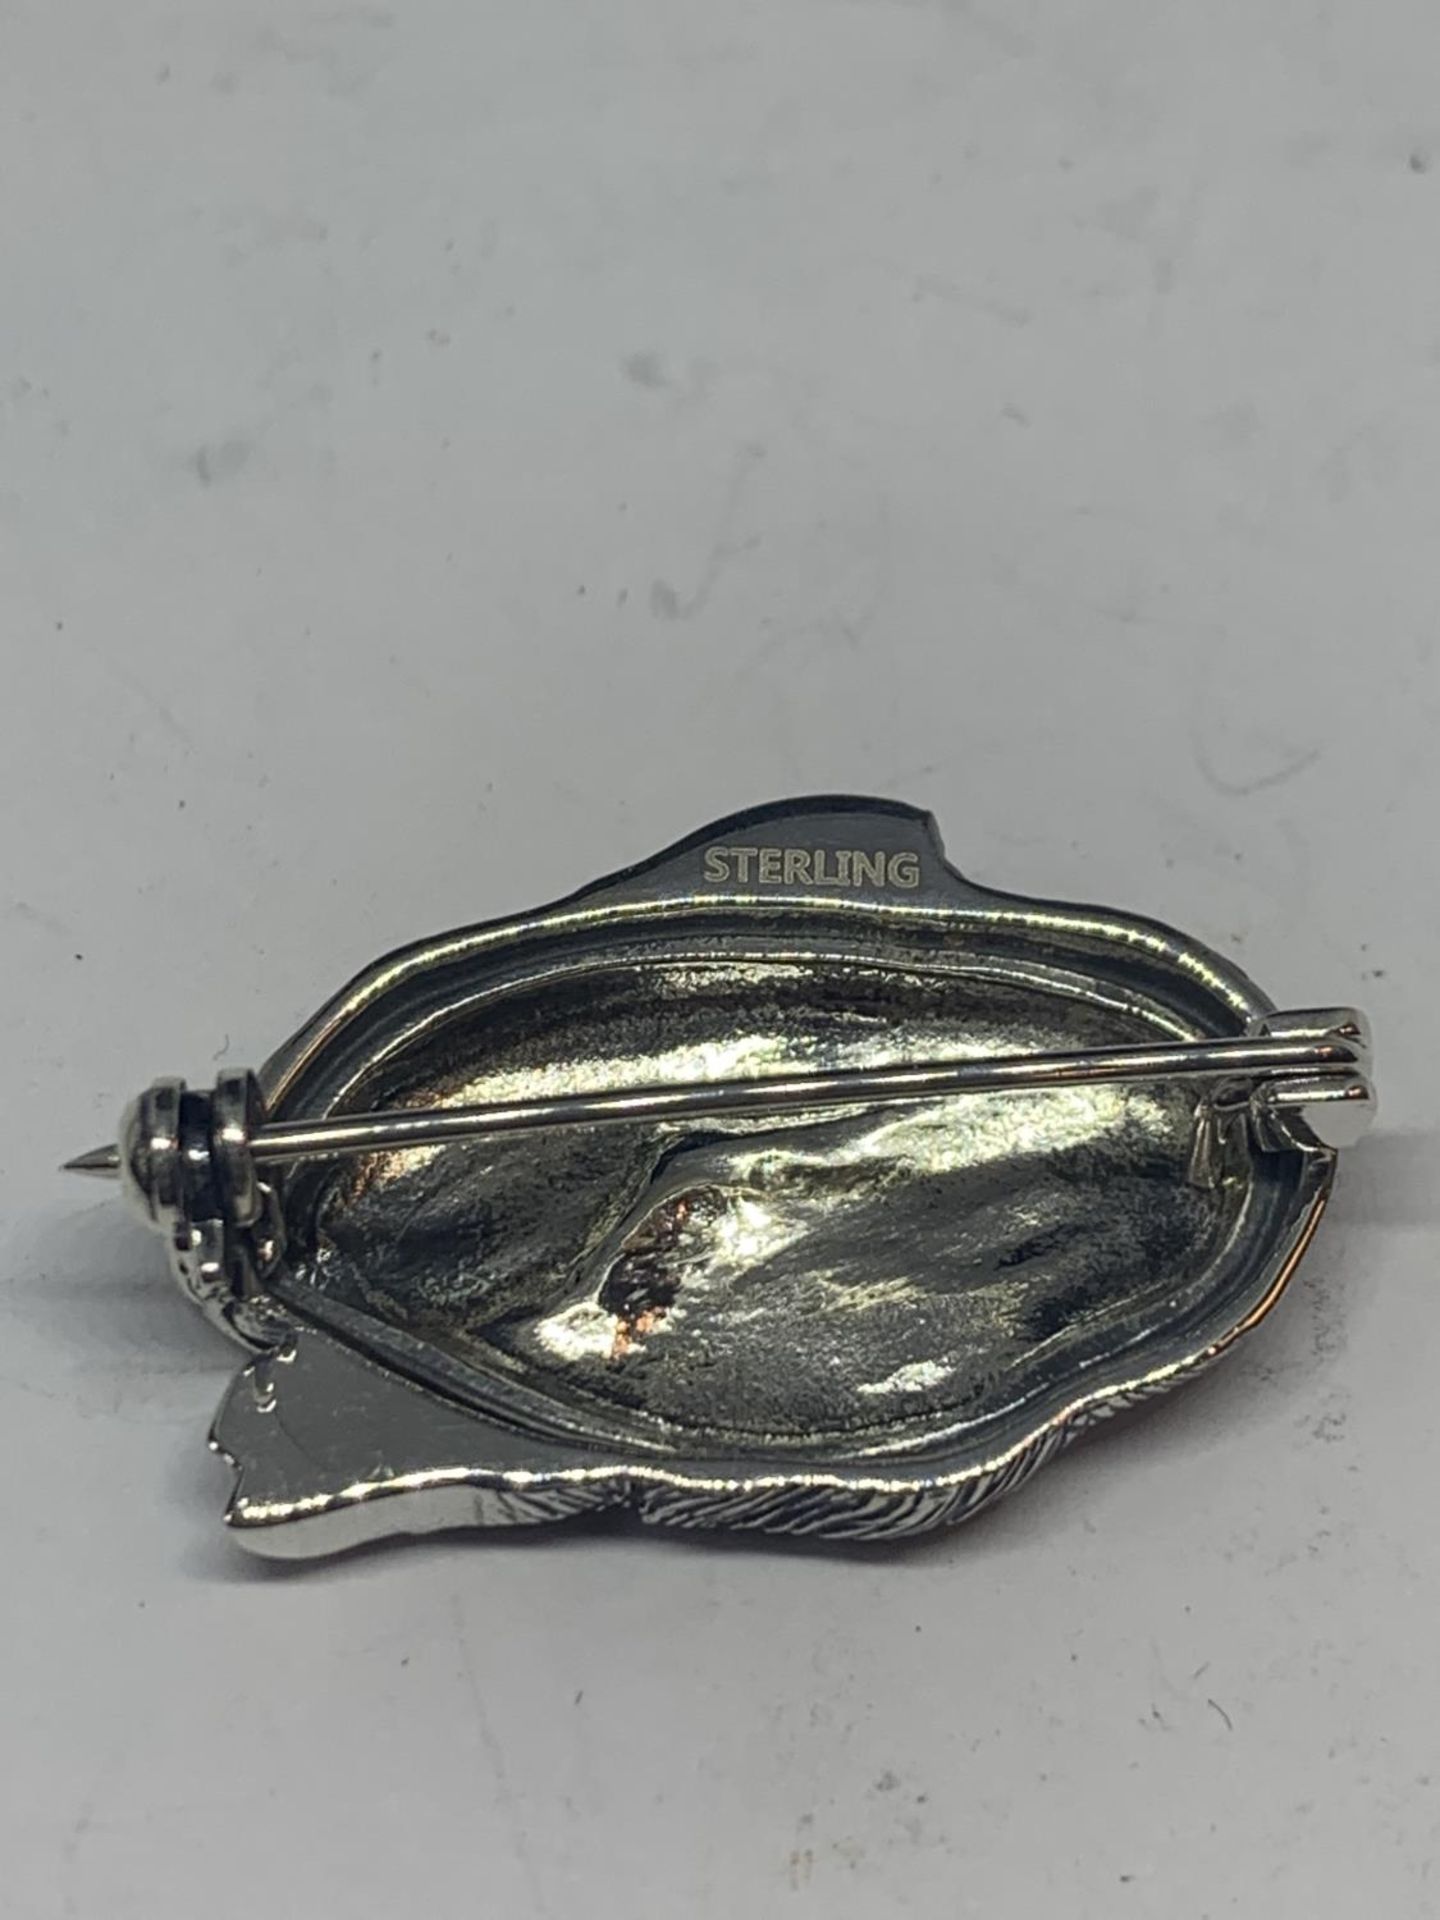 A MARKED SILVER RABBIT BROOCH - Image 3 of 4